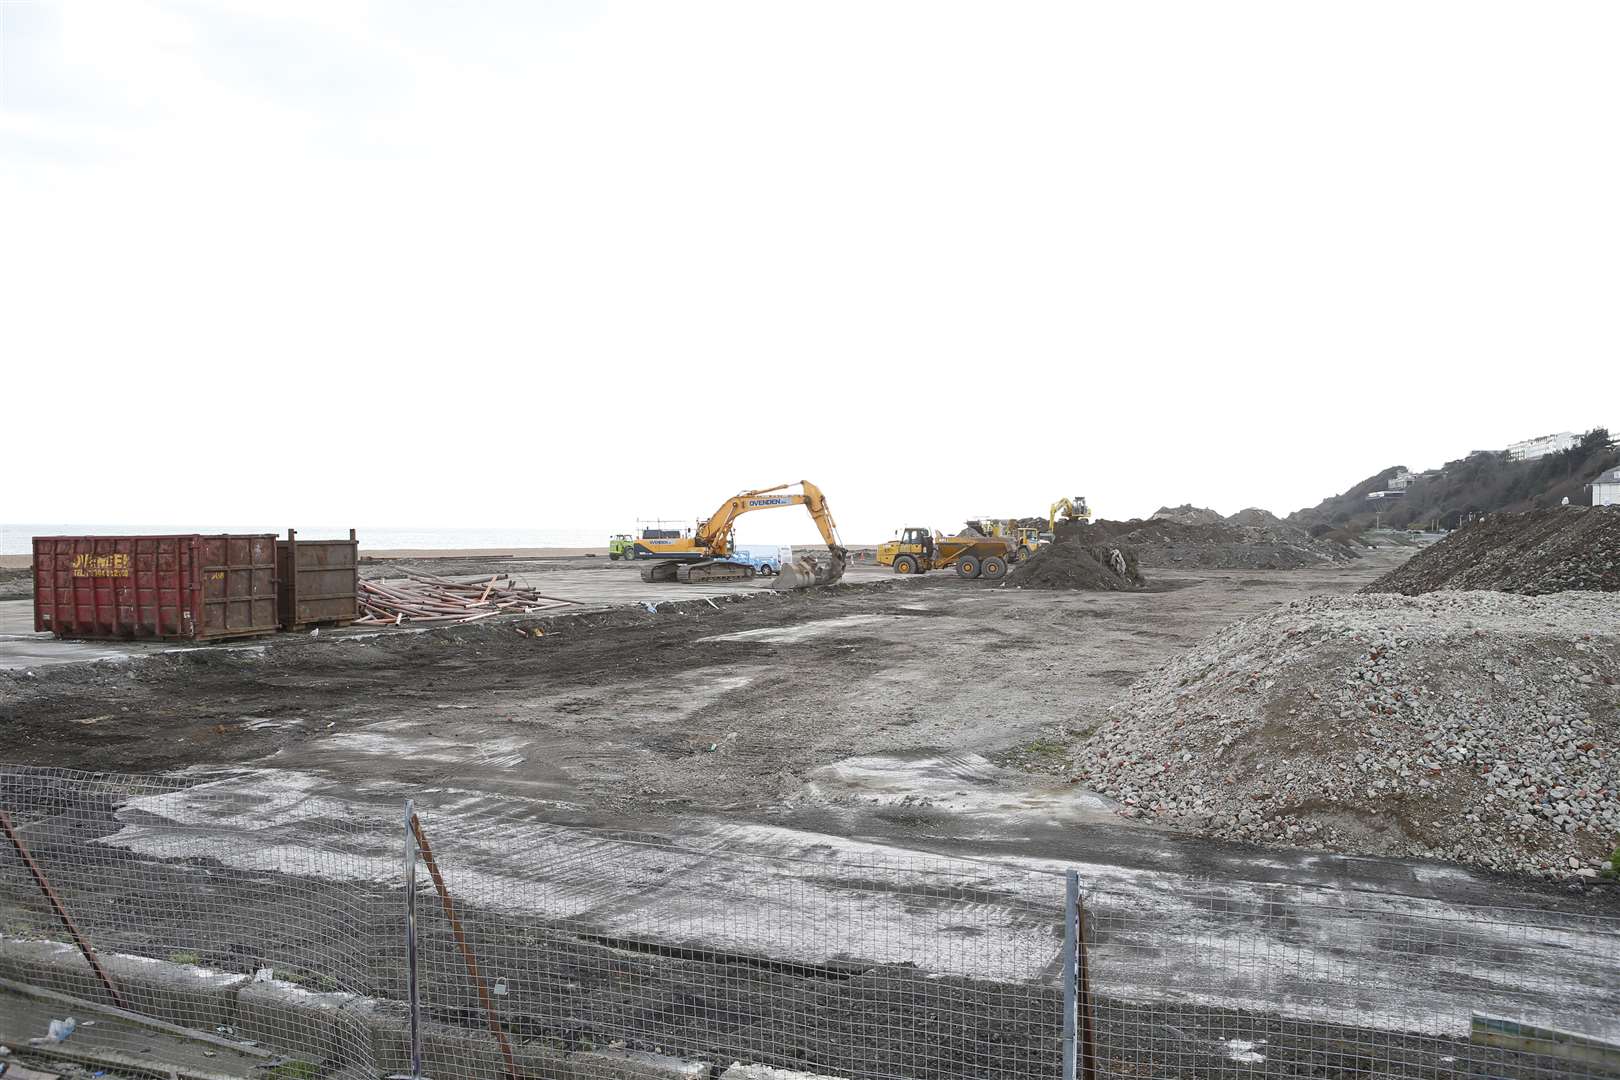 March 2017: Diggers are now on the beach where the Priz once stood clearing shingle to raise the beach ahead of the Folkestone Seafront redevelopment